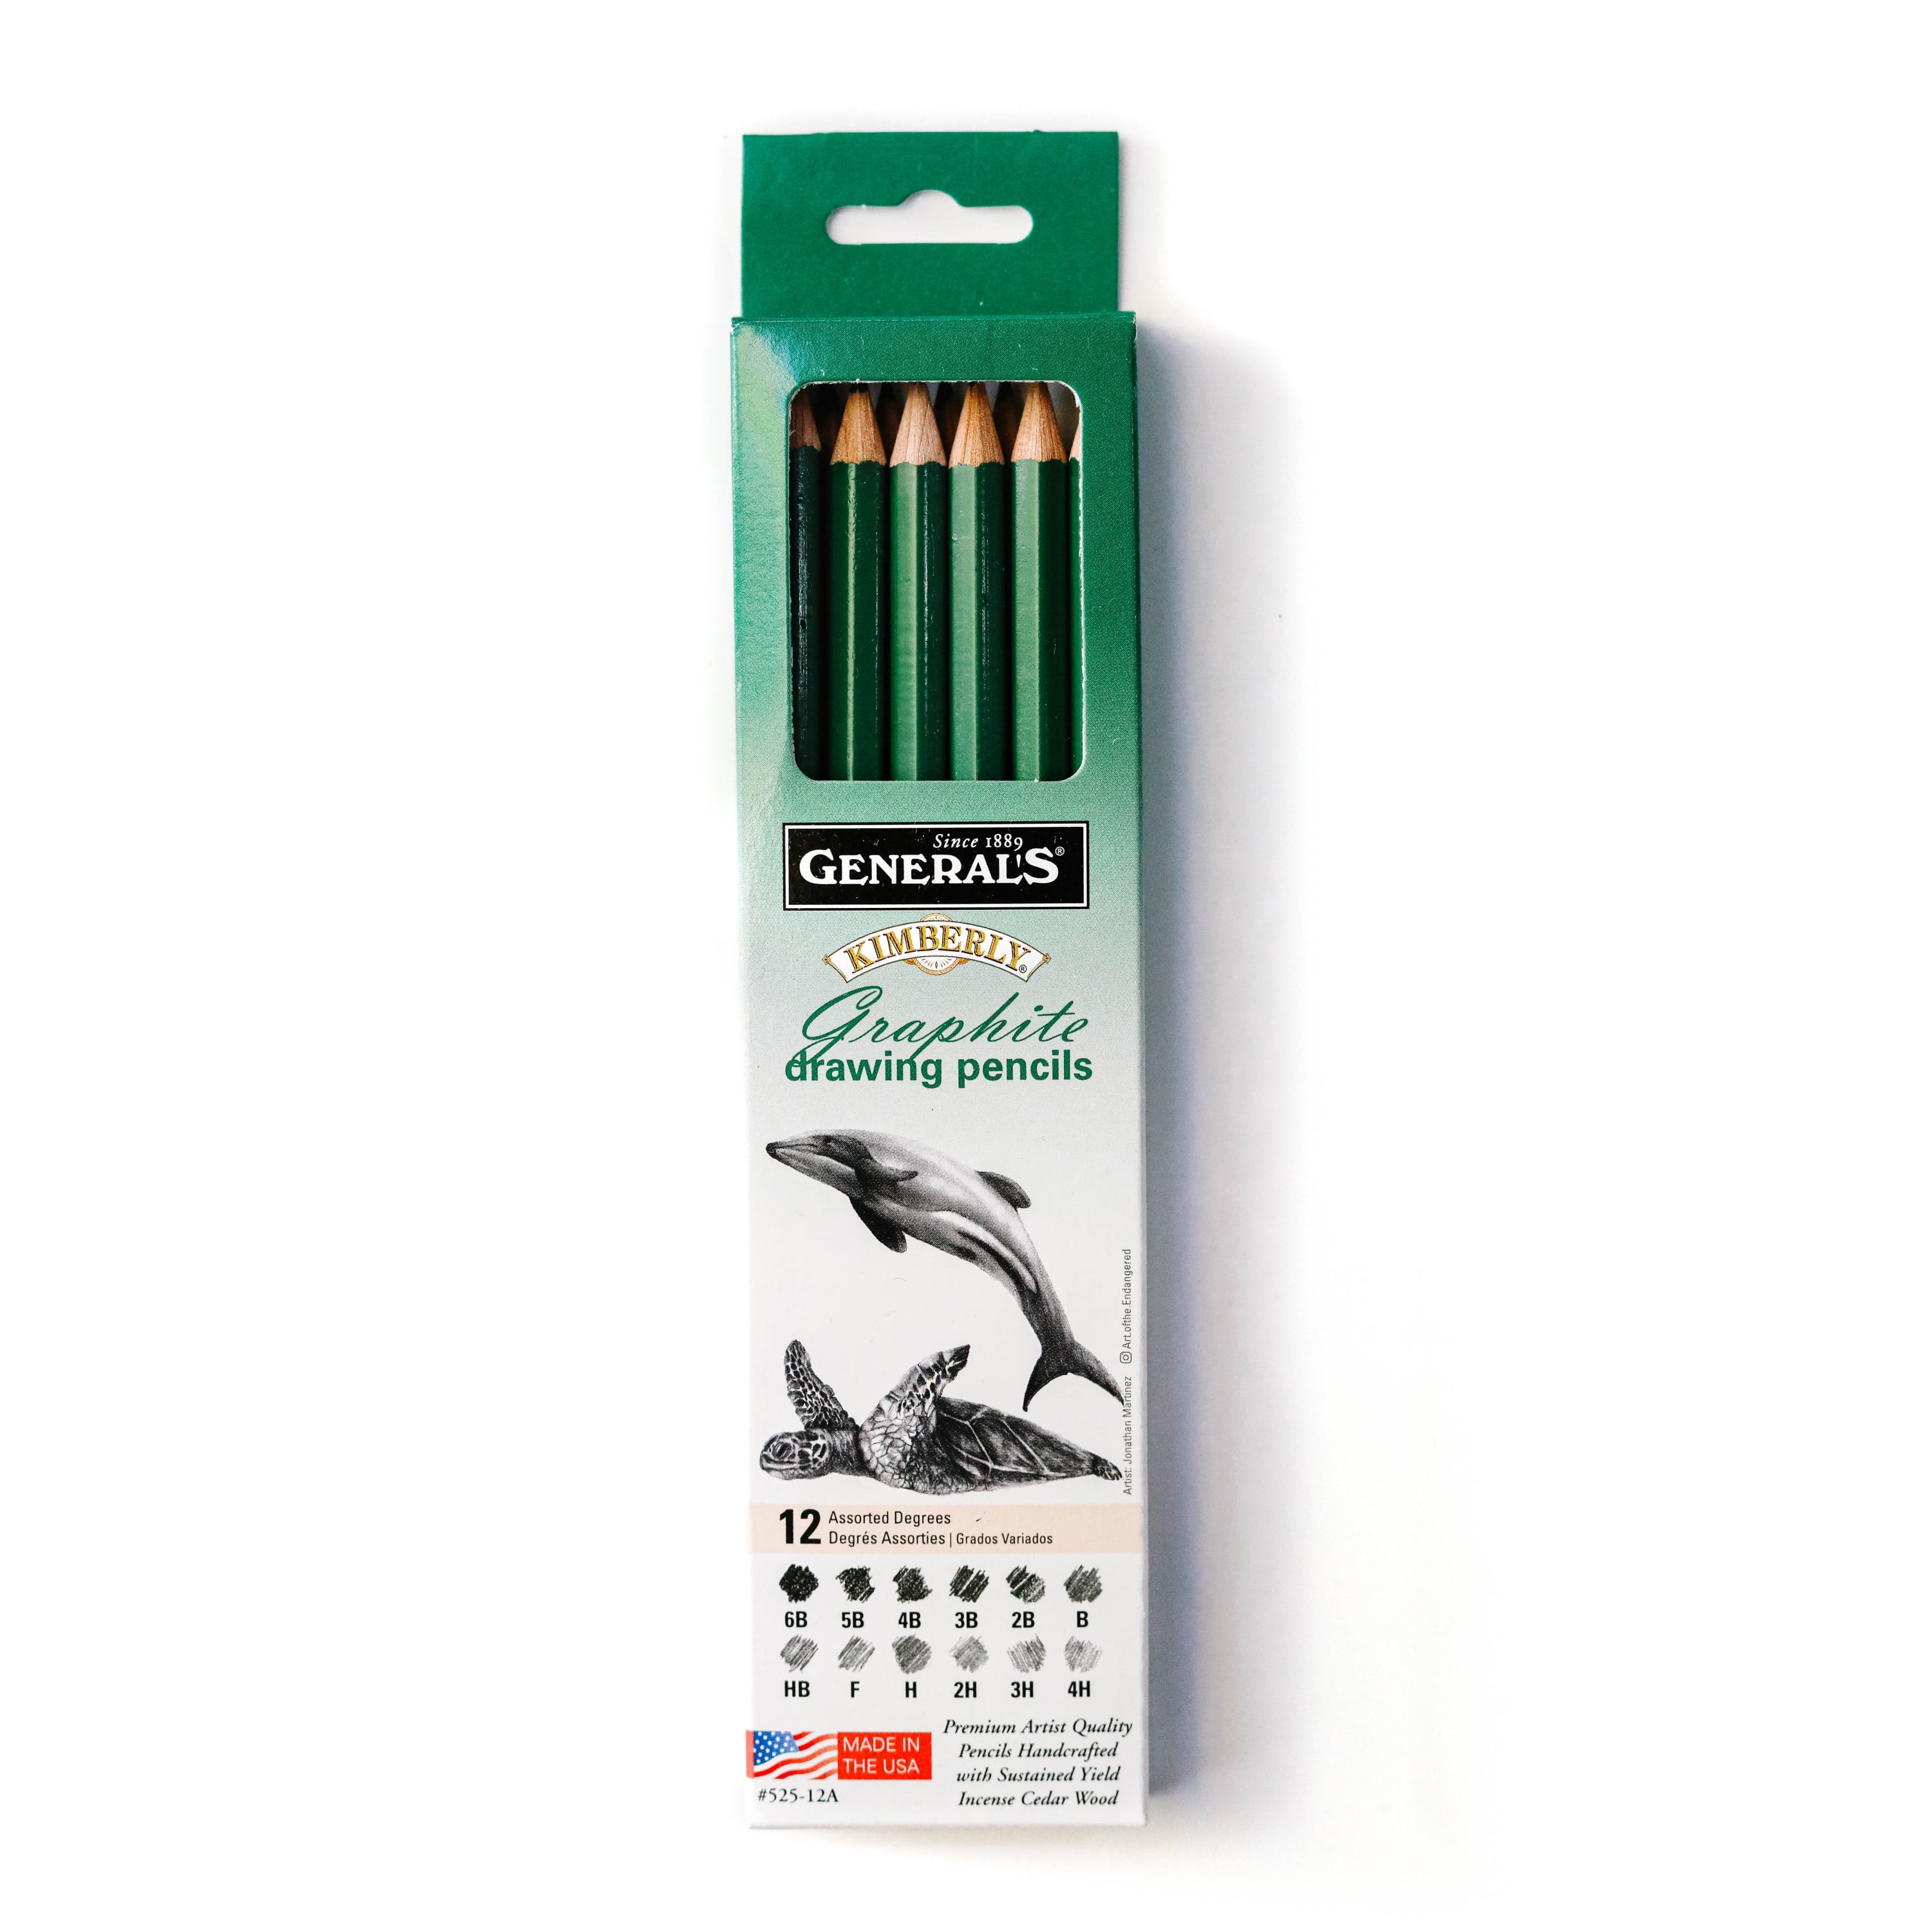 General's Kimberly Graphite Pencils